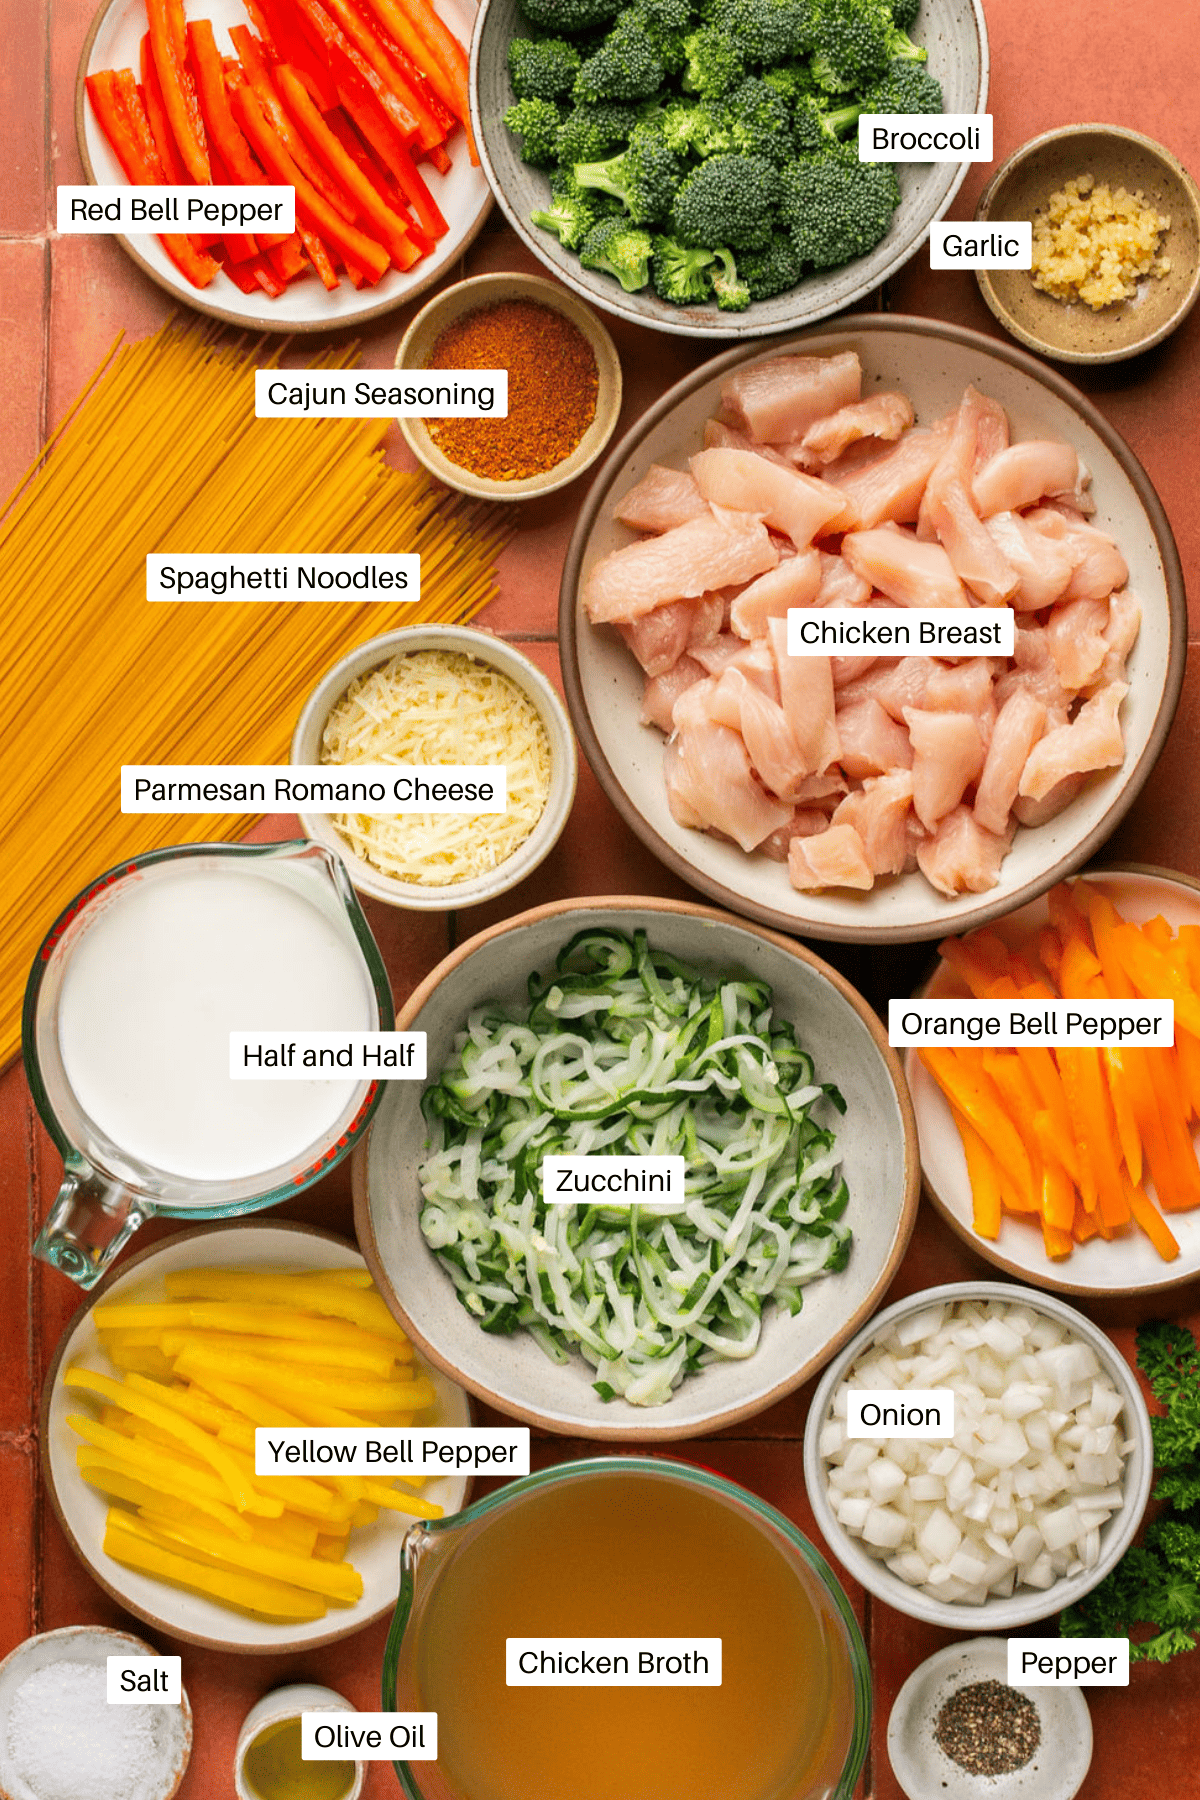 Ingredients laid out for the recipe.